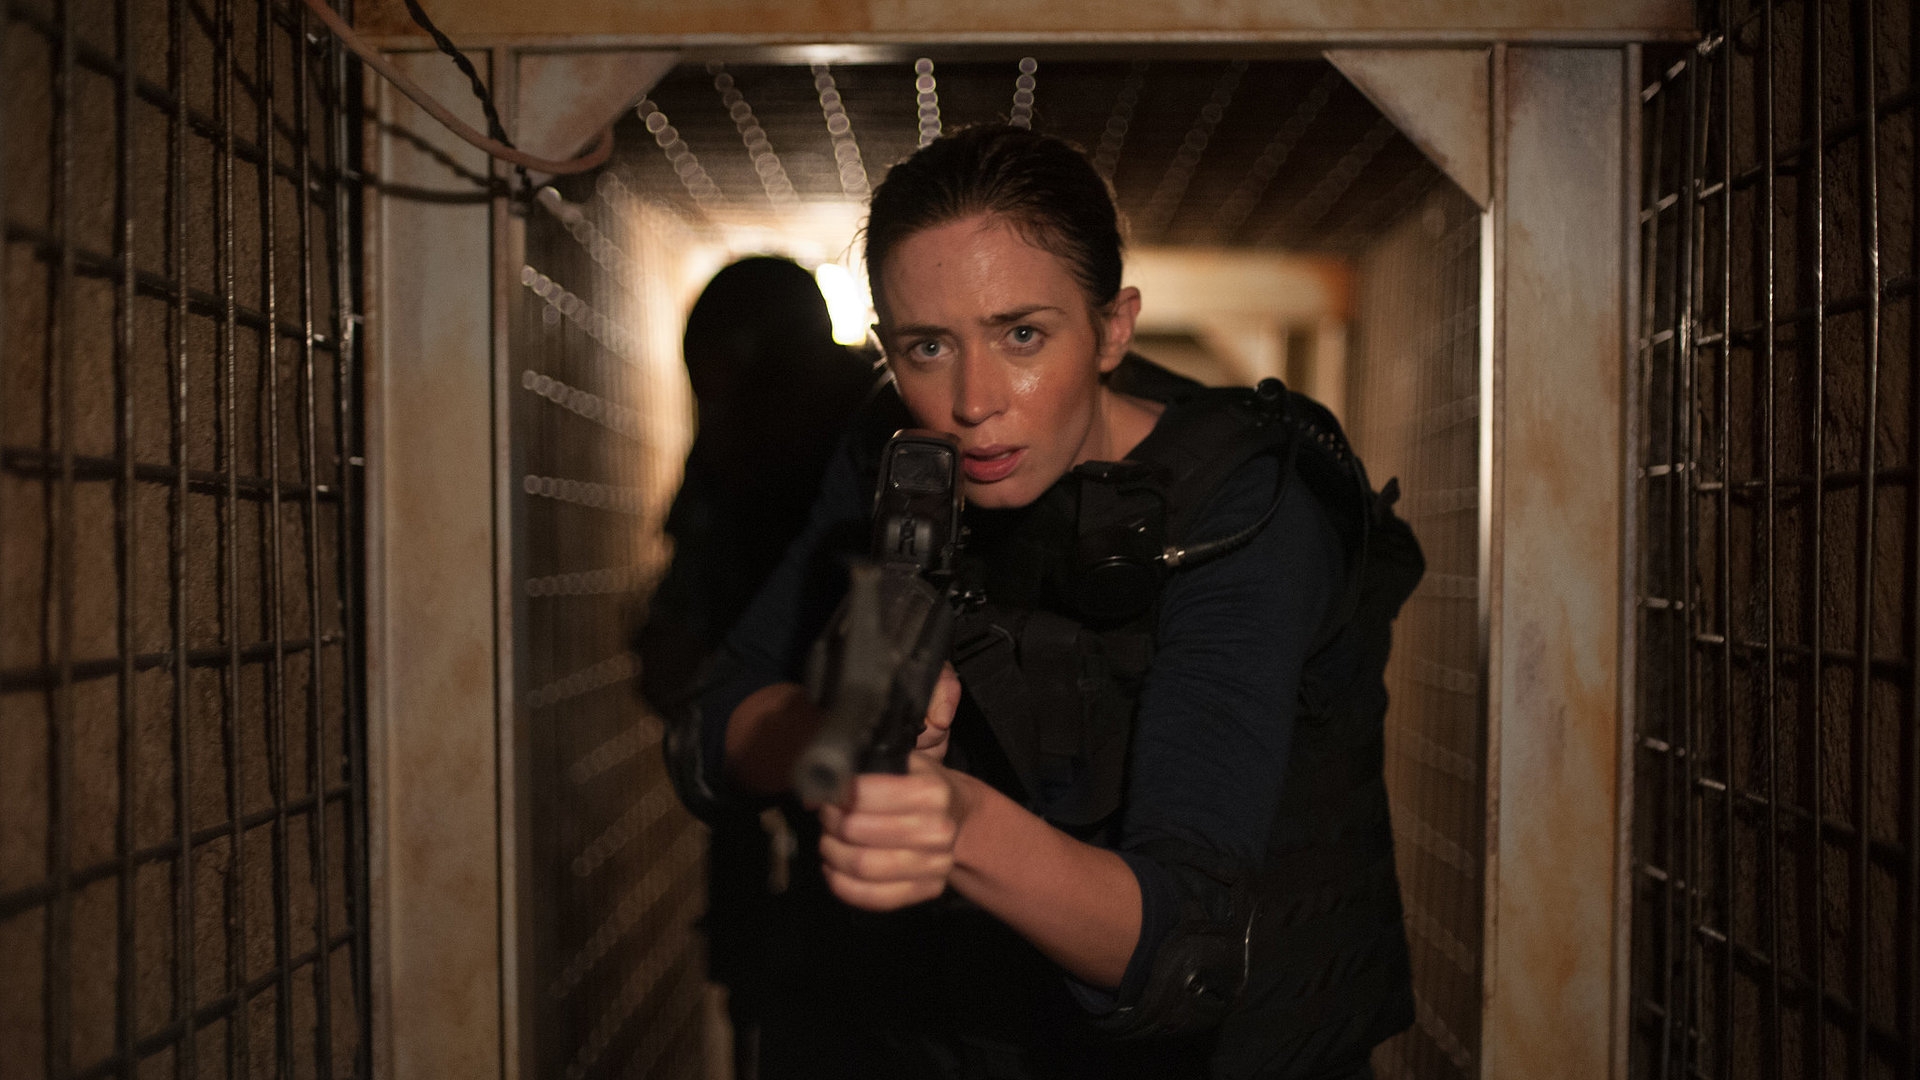 Sicario Emily Blunt for 1920 x 1080 HDTV 1080p resolution